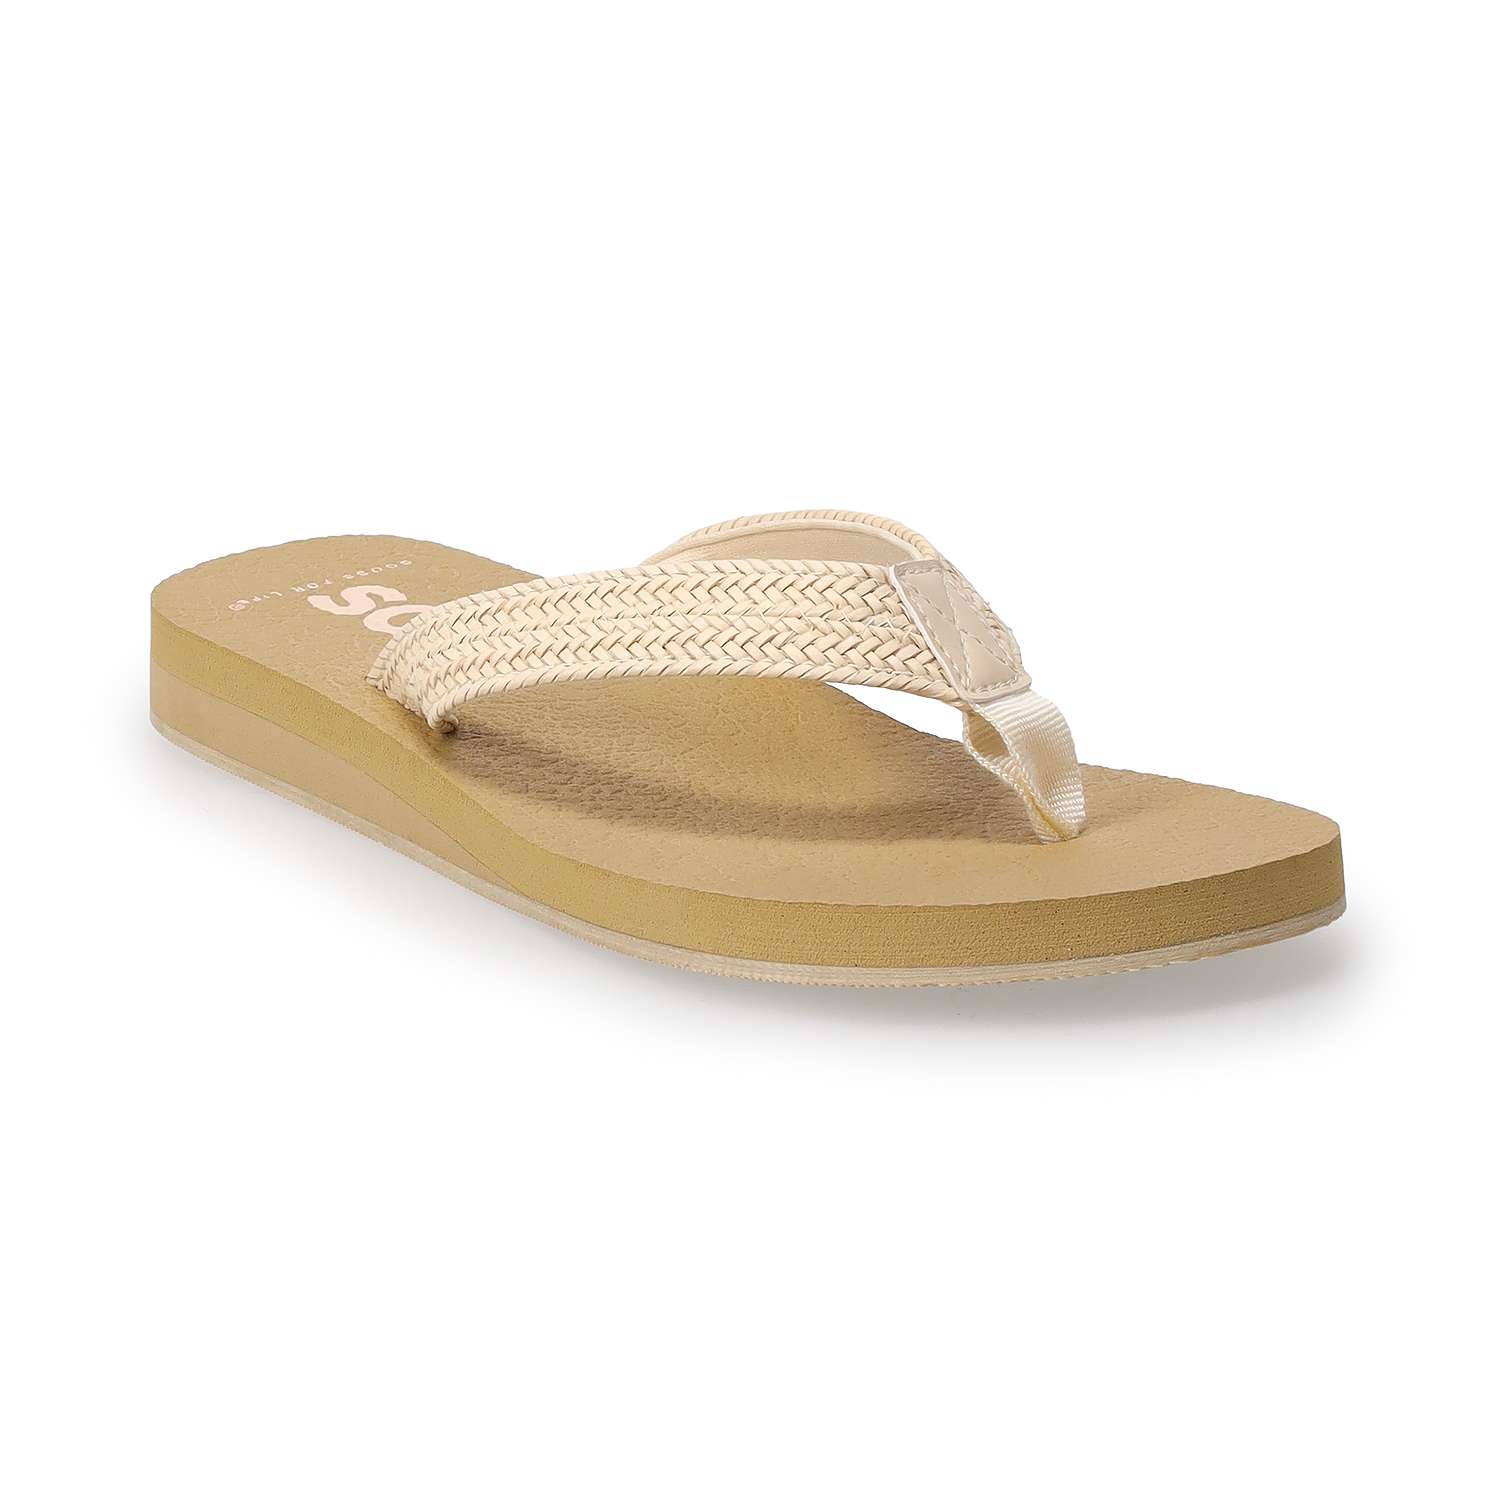 SO Bloomfield Women's Thong Sandals (5 Colors) $7.64 + Free Store Pickup at Kohl's or F/S on Orders $49+